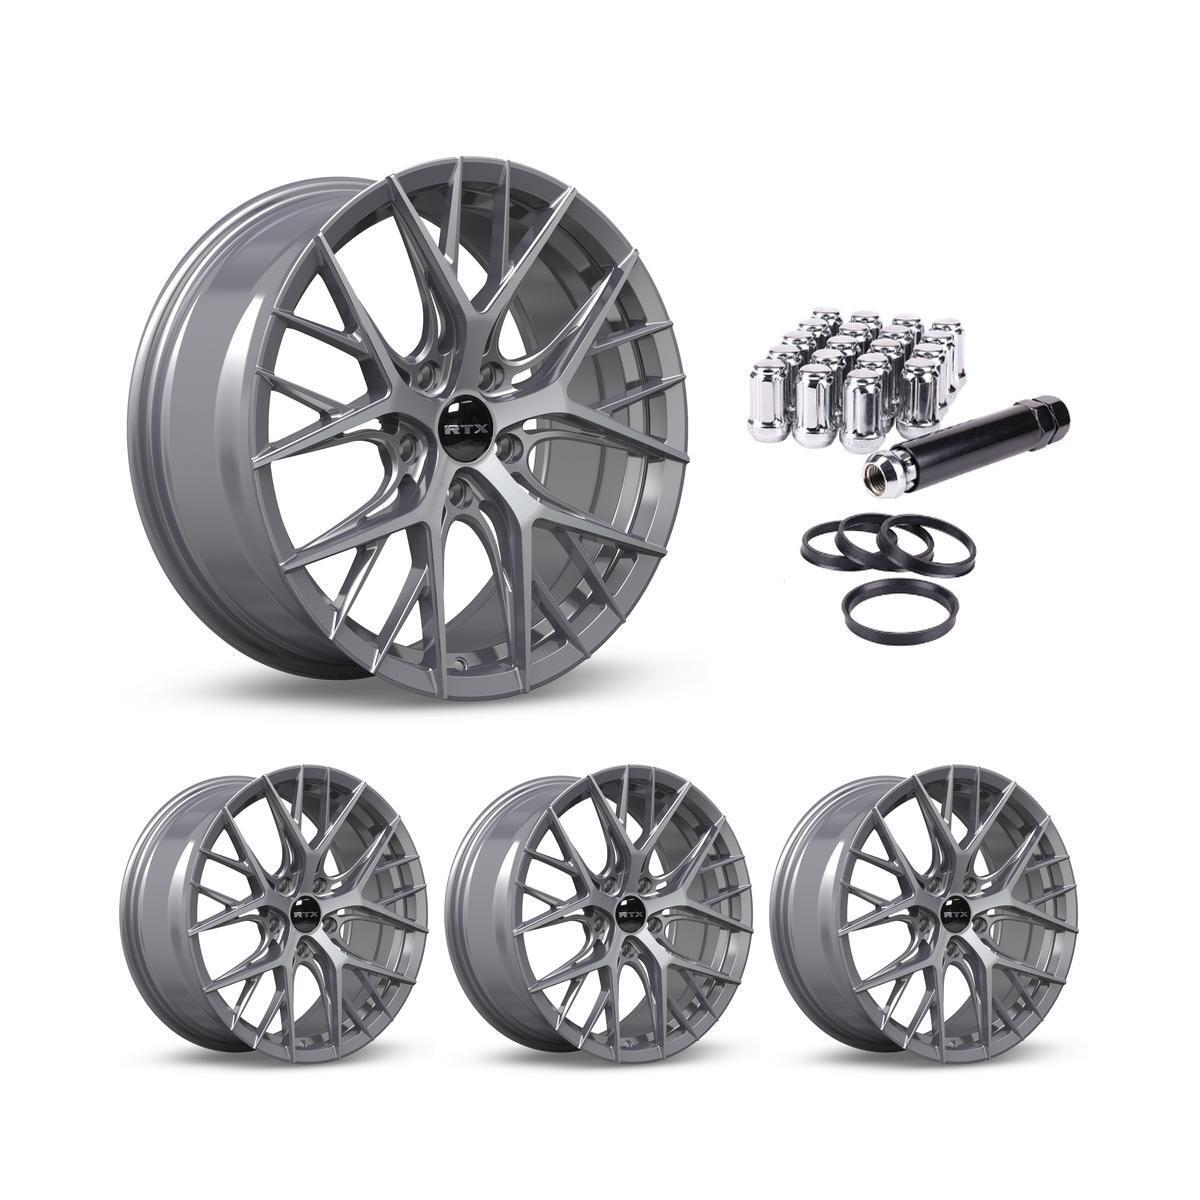 Set of 4 RTX Valkyrie Gray Alloy Wheel Rims for Acura P38273 20x8.5 20 Inch 